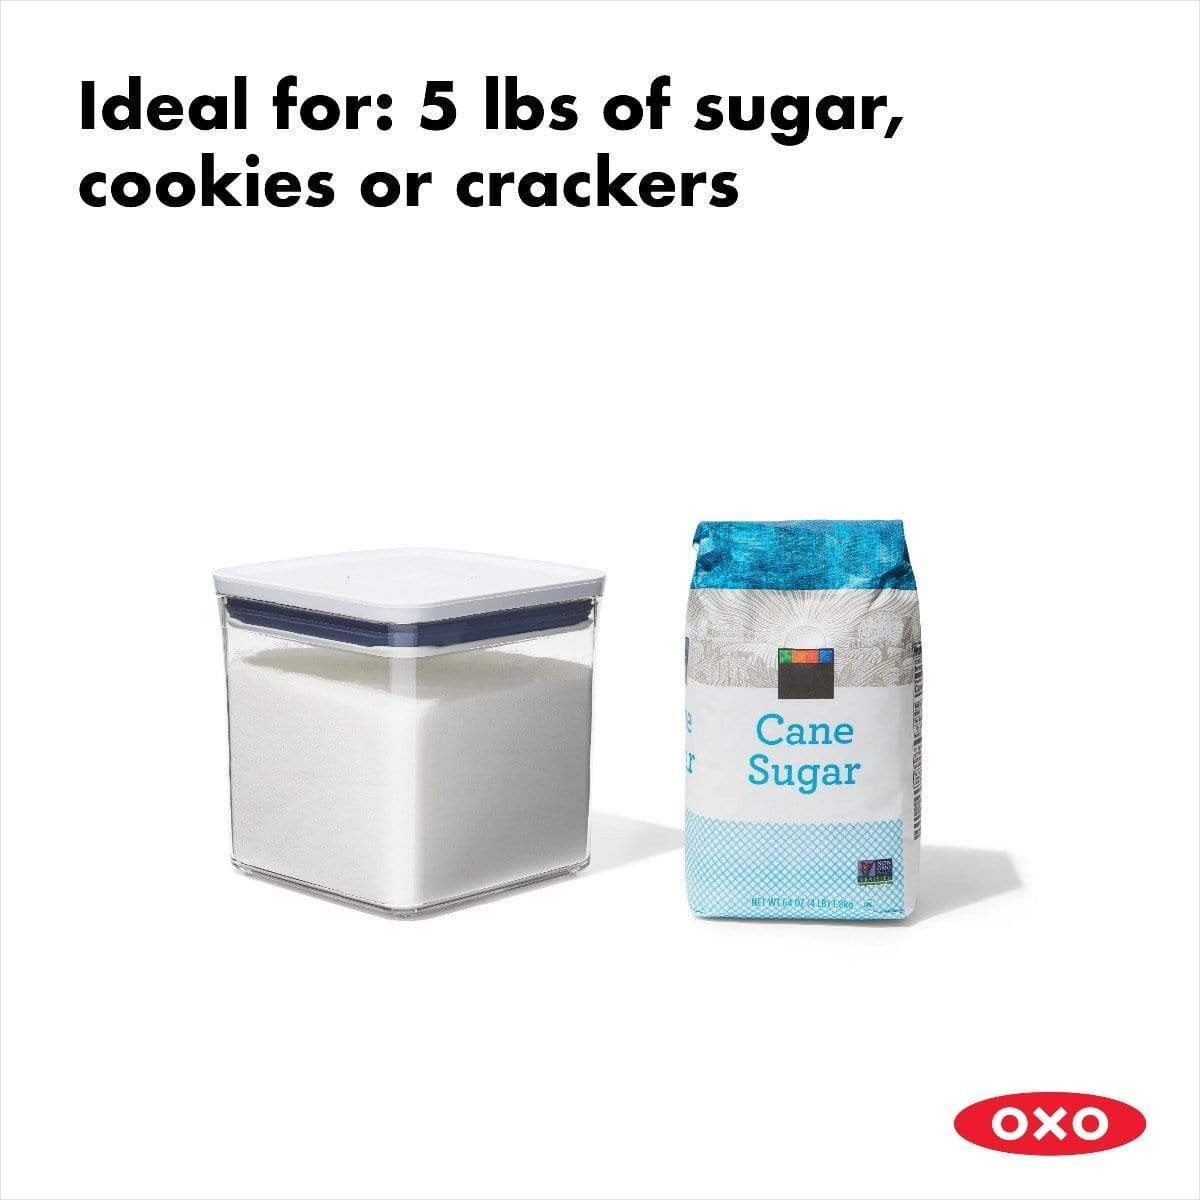 https://cdn.shopify.com/s/files/1/0473/5398/7229/products/oxo-oxo-2-8-qt-pop-square-canister-38864-21048445337760_1600x.jpg?v=1626104292